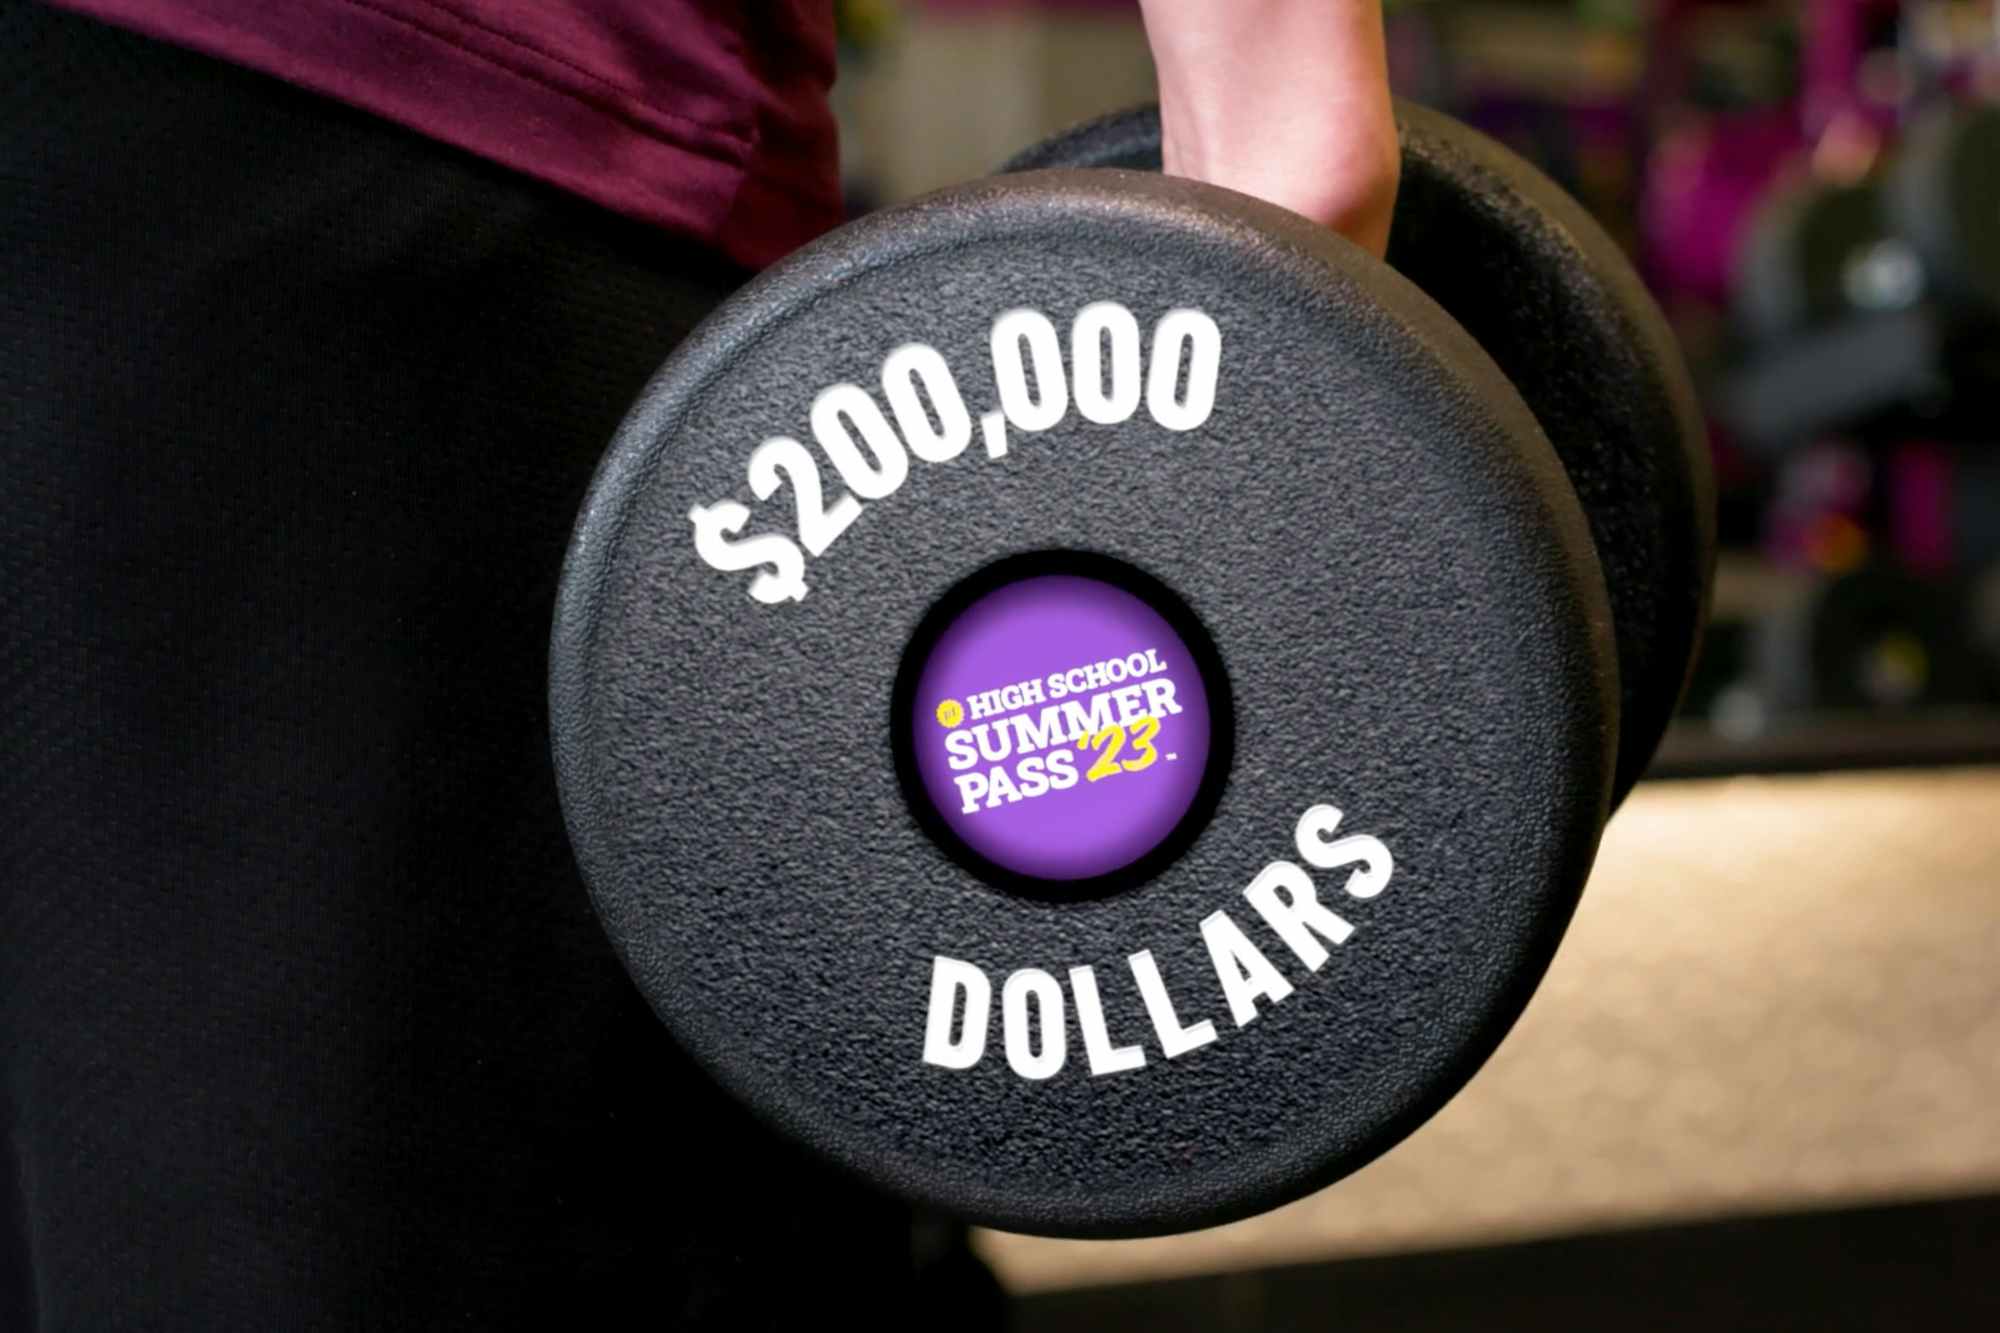 A dumbbell with $200,000 Dollars printed on it